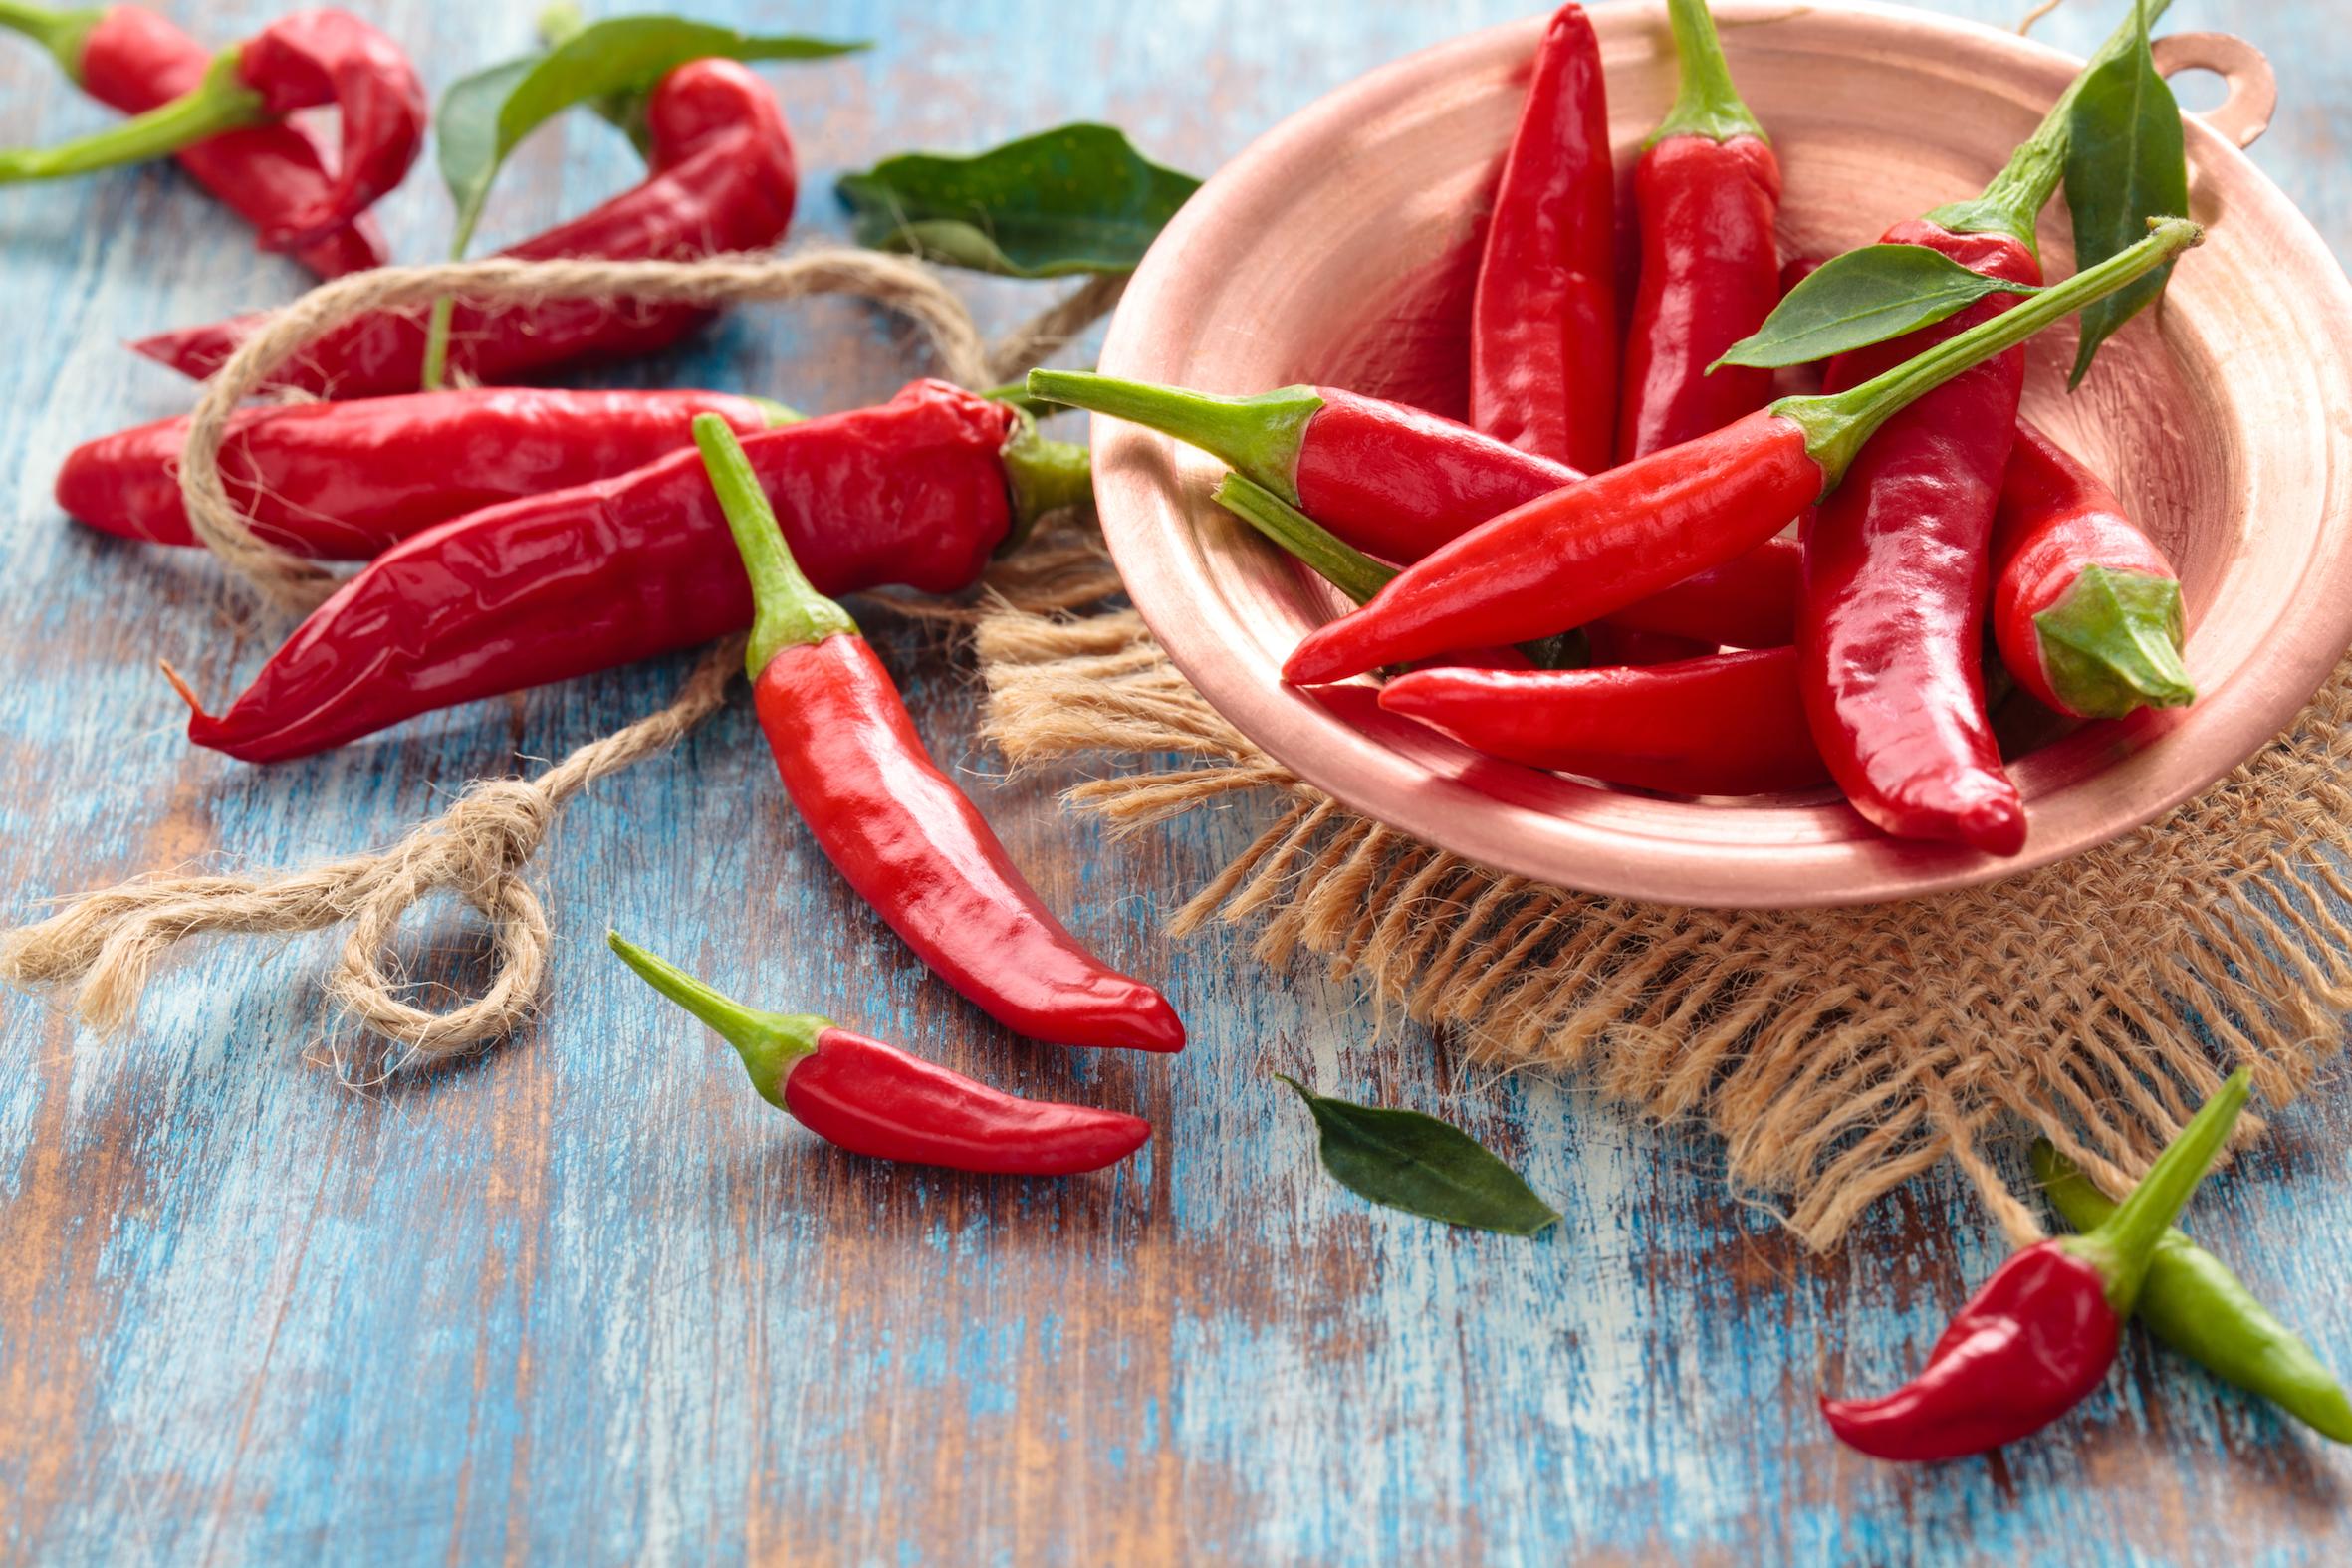 Burning Up Pain to Pounds—The Many Benefits of Hot Peppers